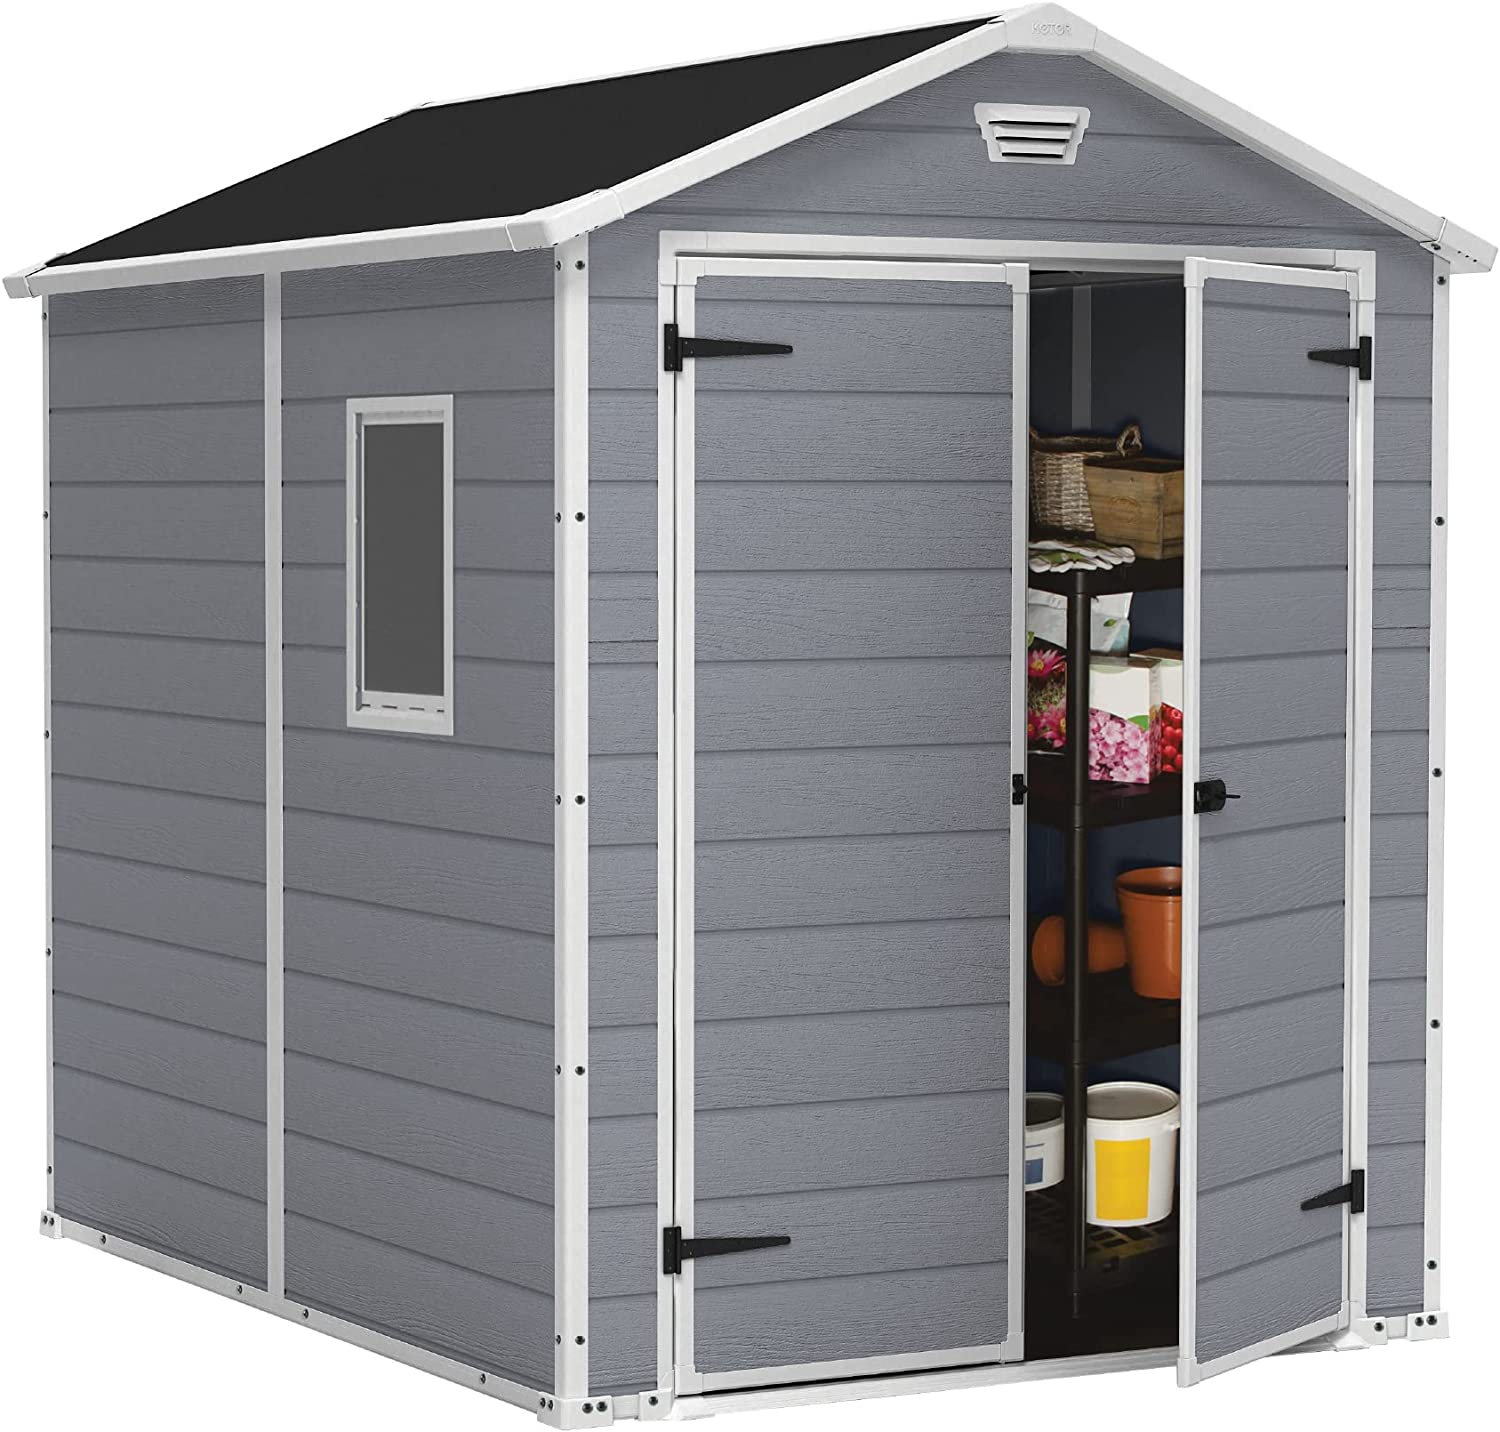 Keter Manor 6x8 Resin Outdoor Storage Shed Kit-Perfect [...]